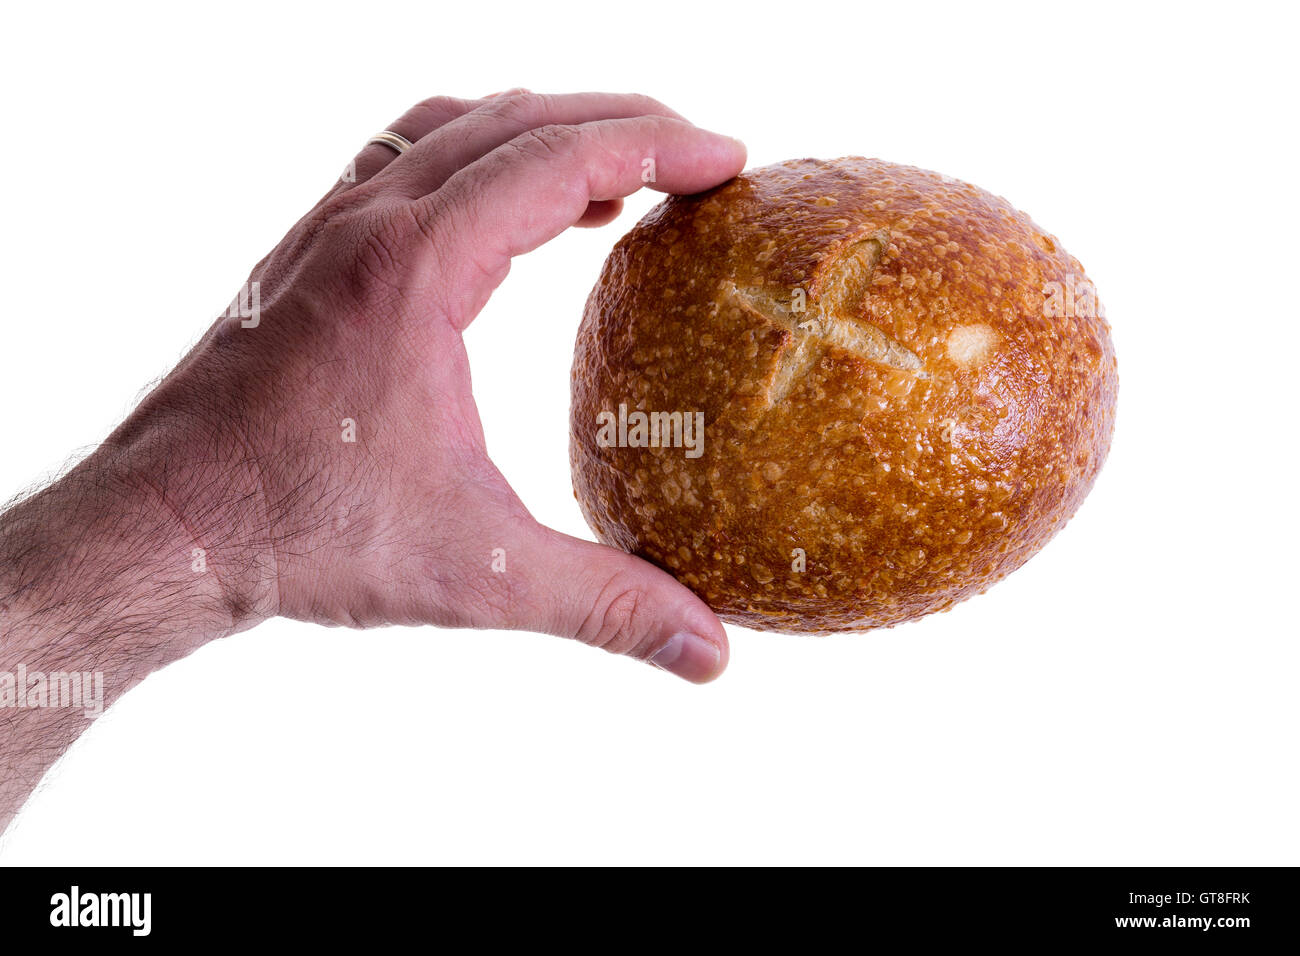 Clean male hand gently holding a freshly baked sourdough bread roll or round bun between finger and thumb isolated on a white ba Stock Photo